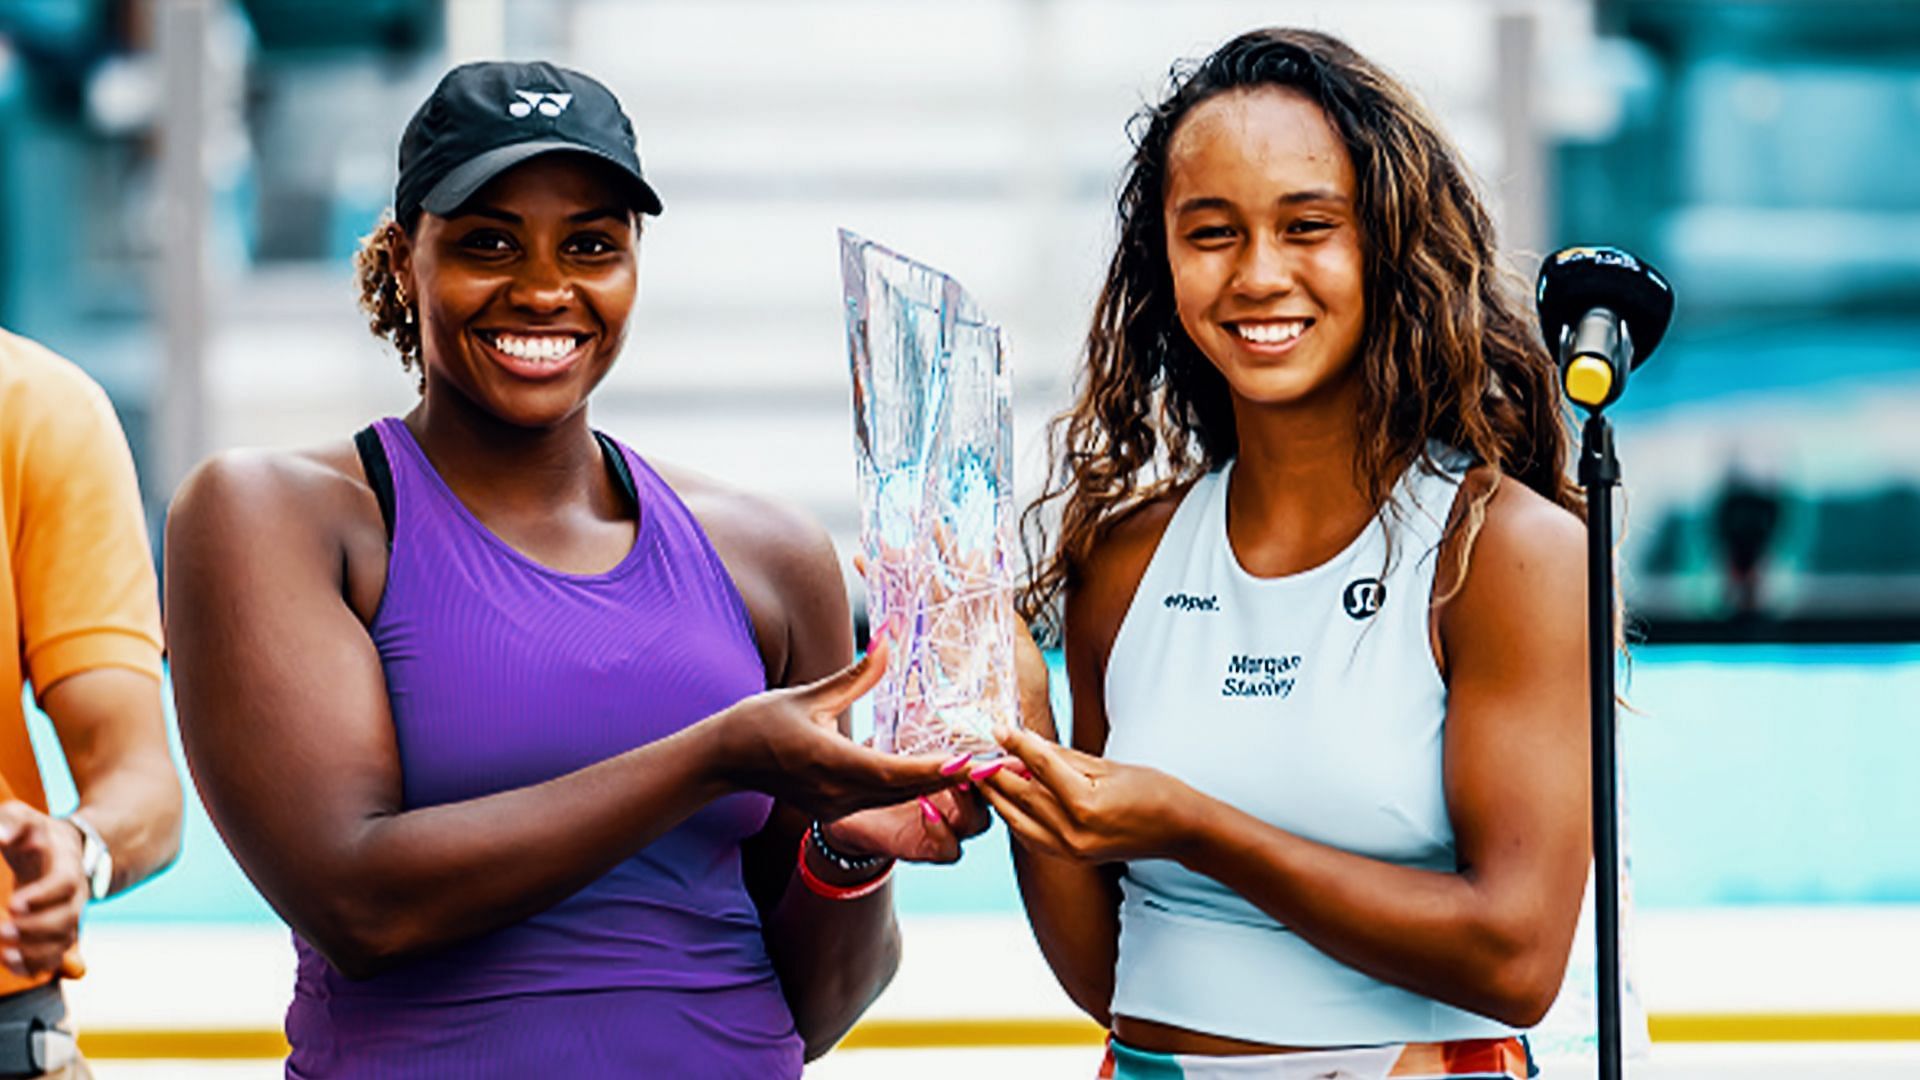 Miami Open runners-up Leylah Fernandez & Taylor Townsend gush over successful doubles partnership